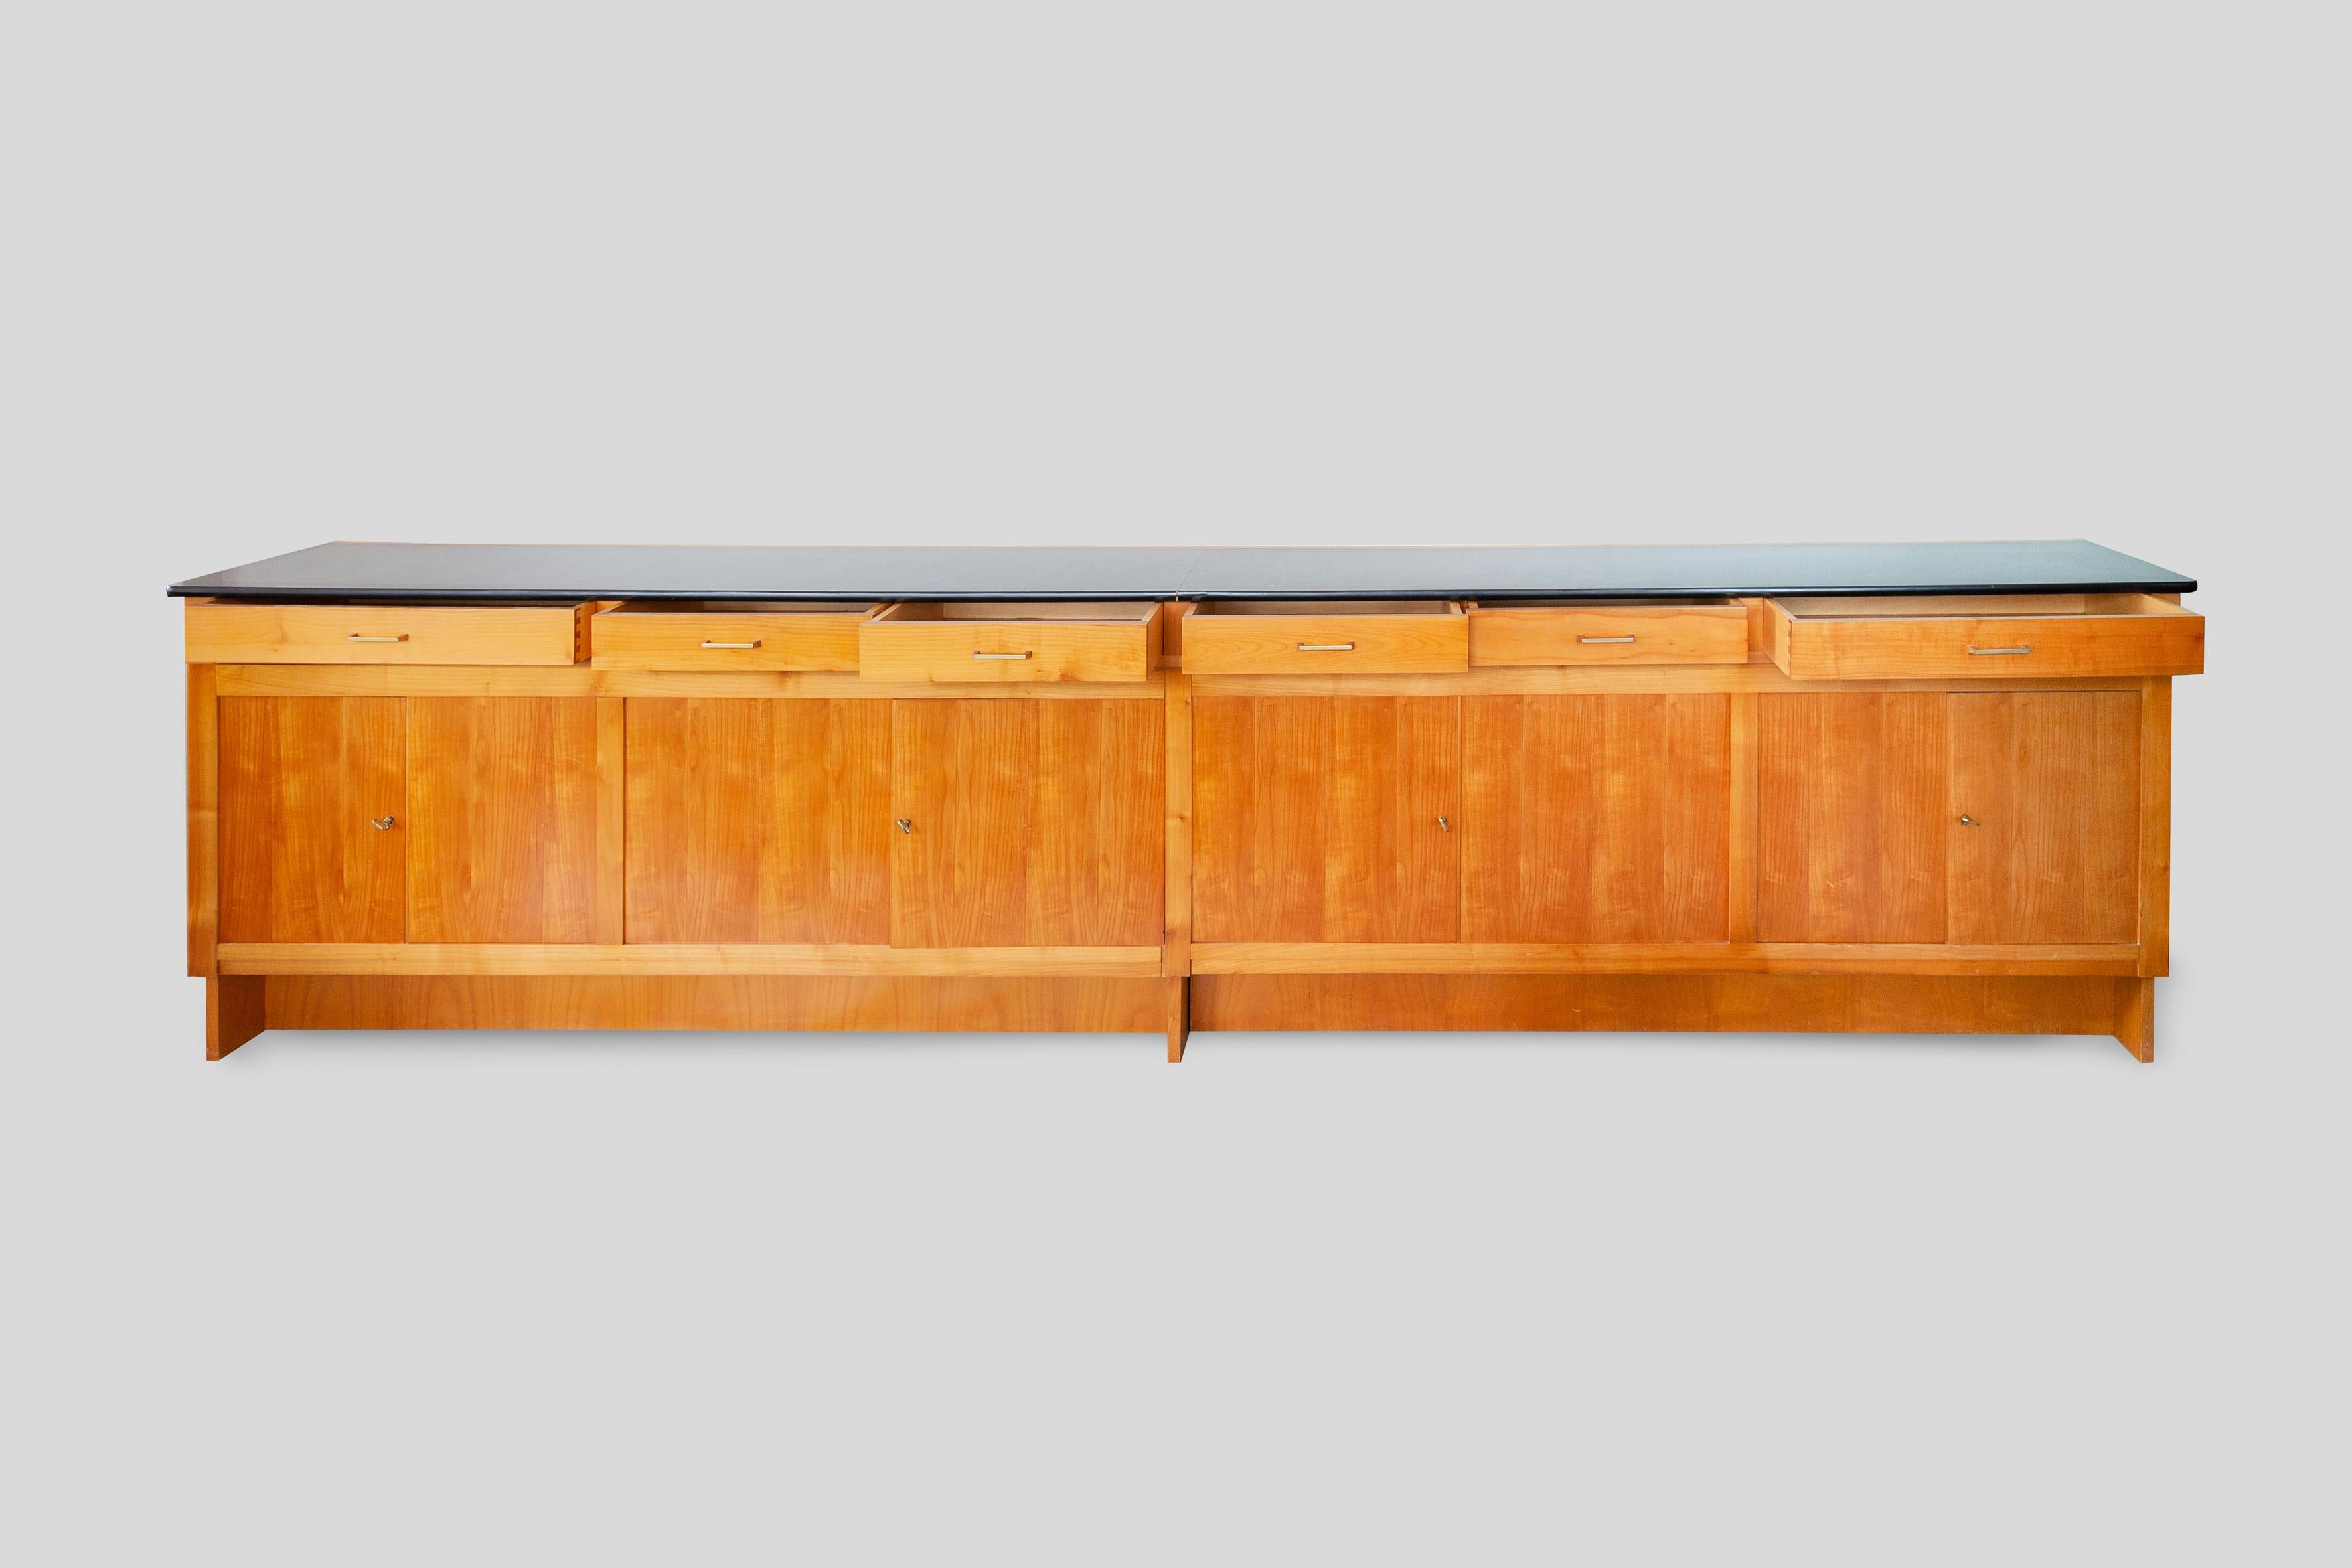 Straight-lined 1960s sideboard with four double doors and black laminated top. The large, beautifully sideboard was designed for a modern apartment in 1965 by an unknown artist. The front in ash wood consists of four compartments the left-hand